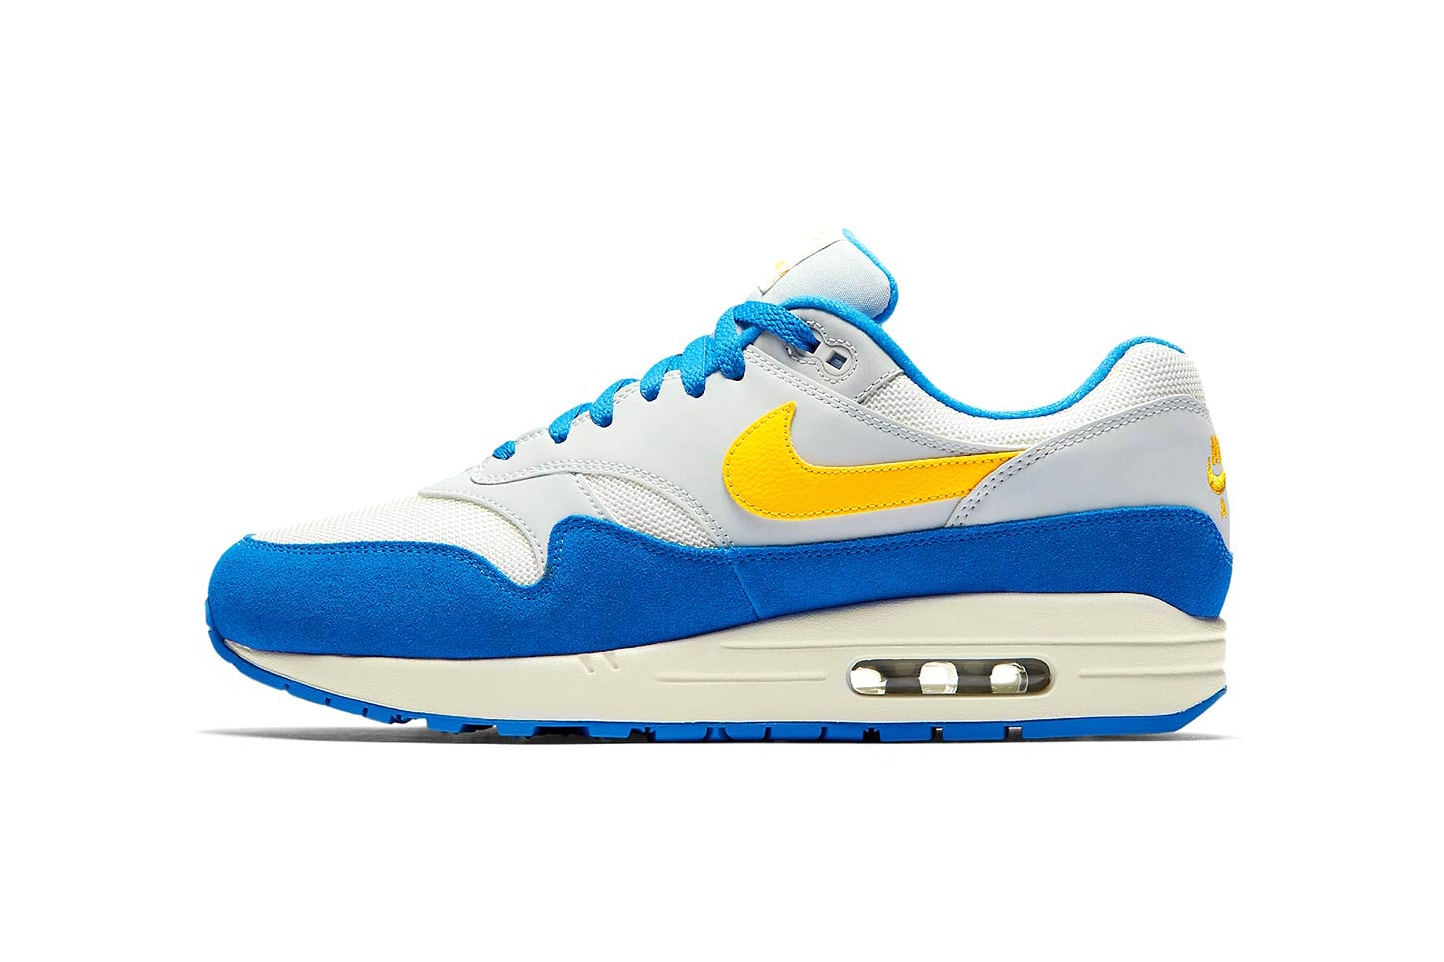 Nike Air Max 1 Sail Amarillo Pure Platinum Signal Blue july 2018 release date info drop sneakers shoes footwear